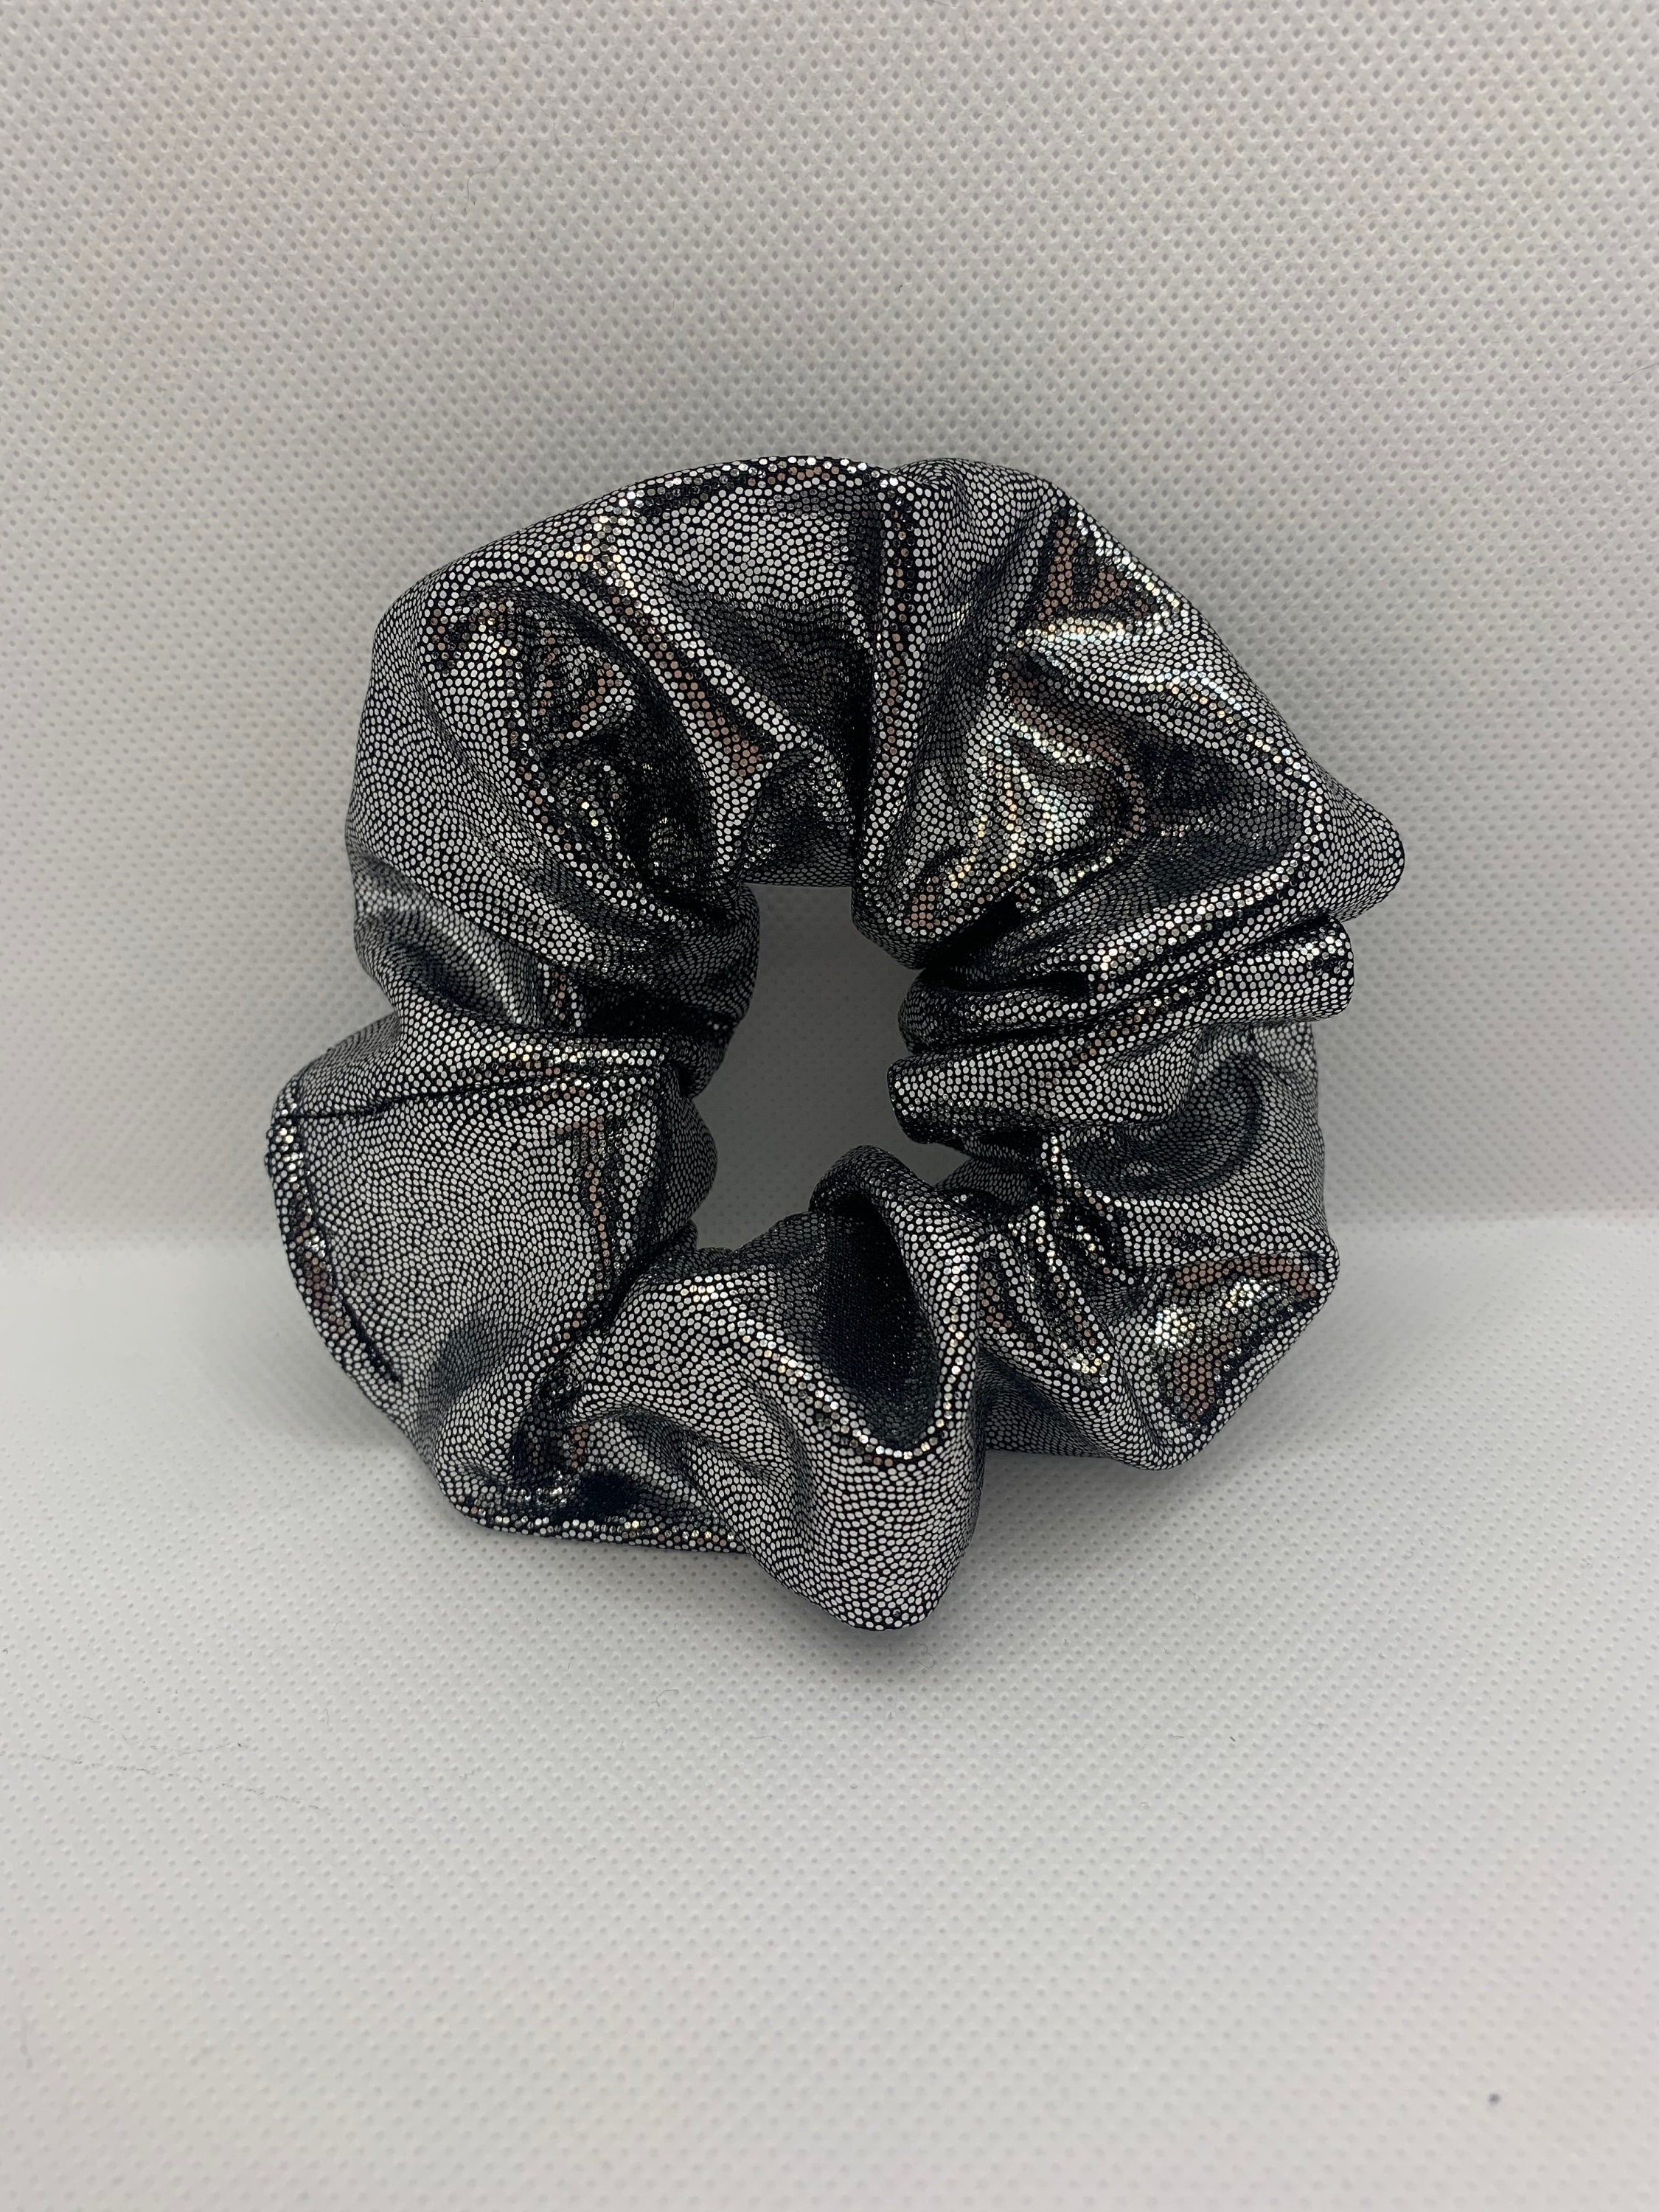 Up-cycled Black and Silver Scrunchie Hand Made Silver | Etsy